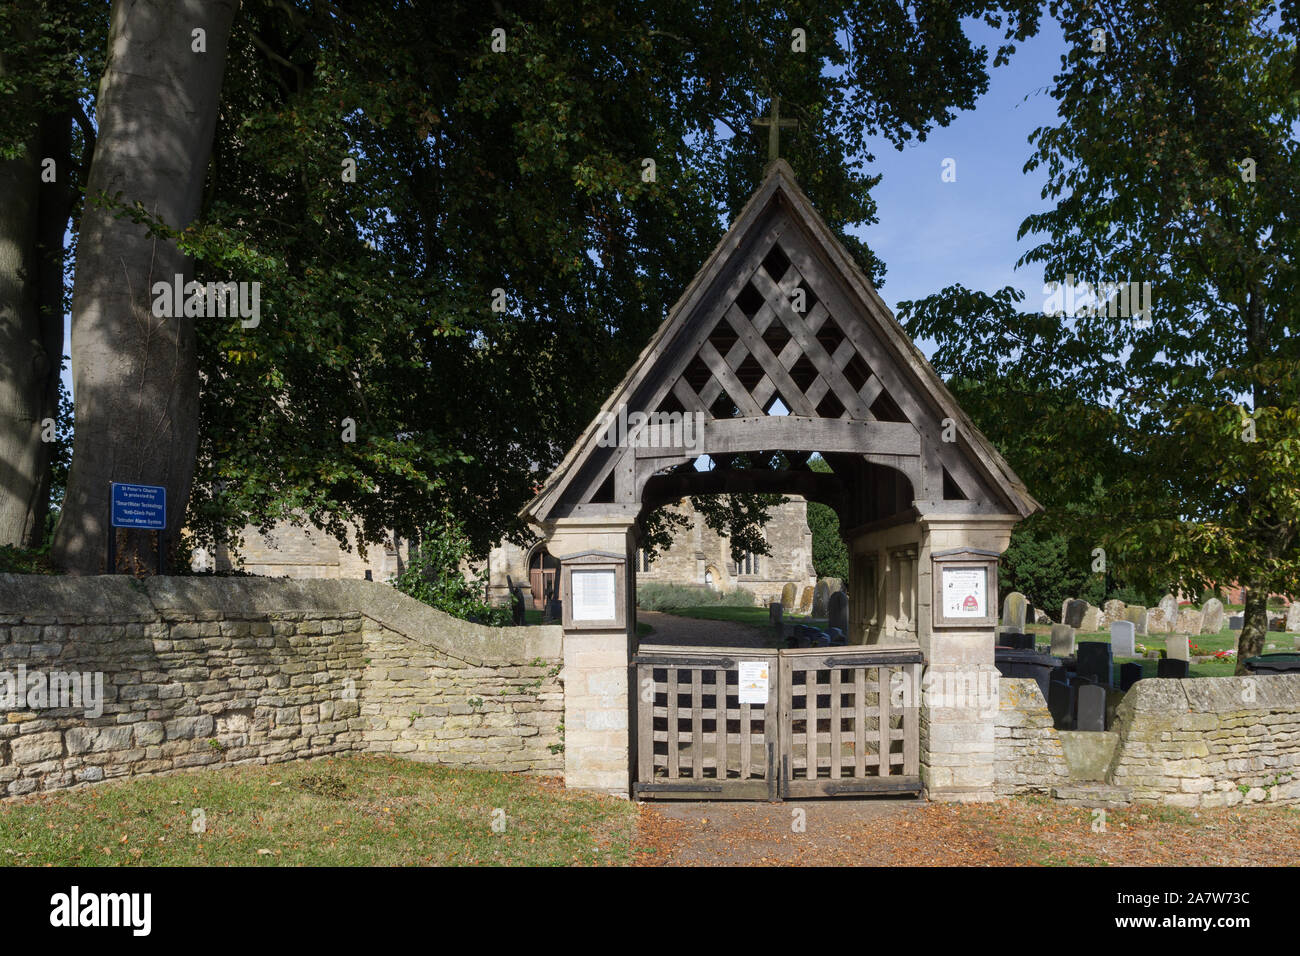 Wooden lych gate to the parish church of St Peter in the village of Sharnbrook, Bedfordshire, UK; Stock Photo